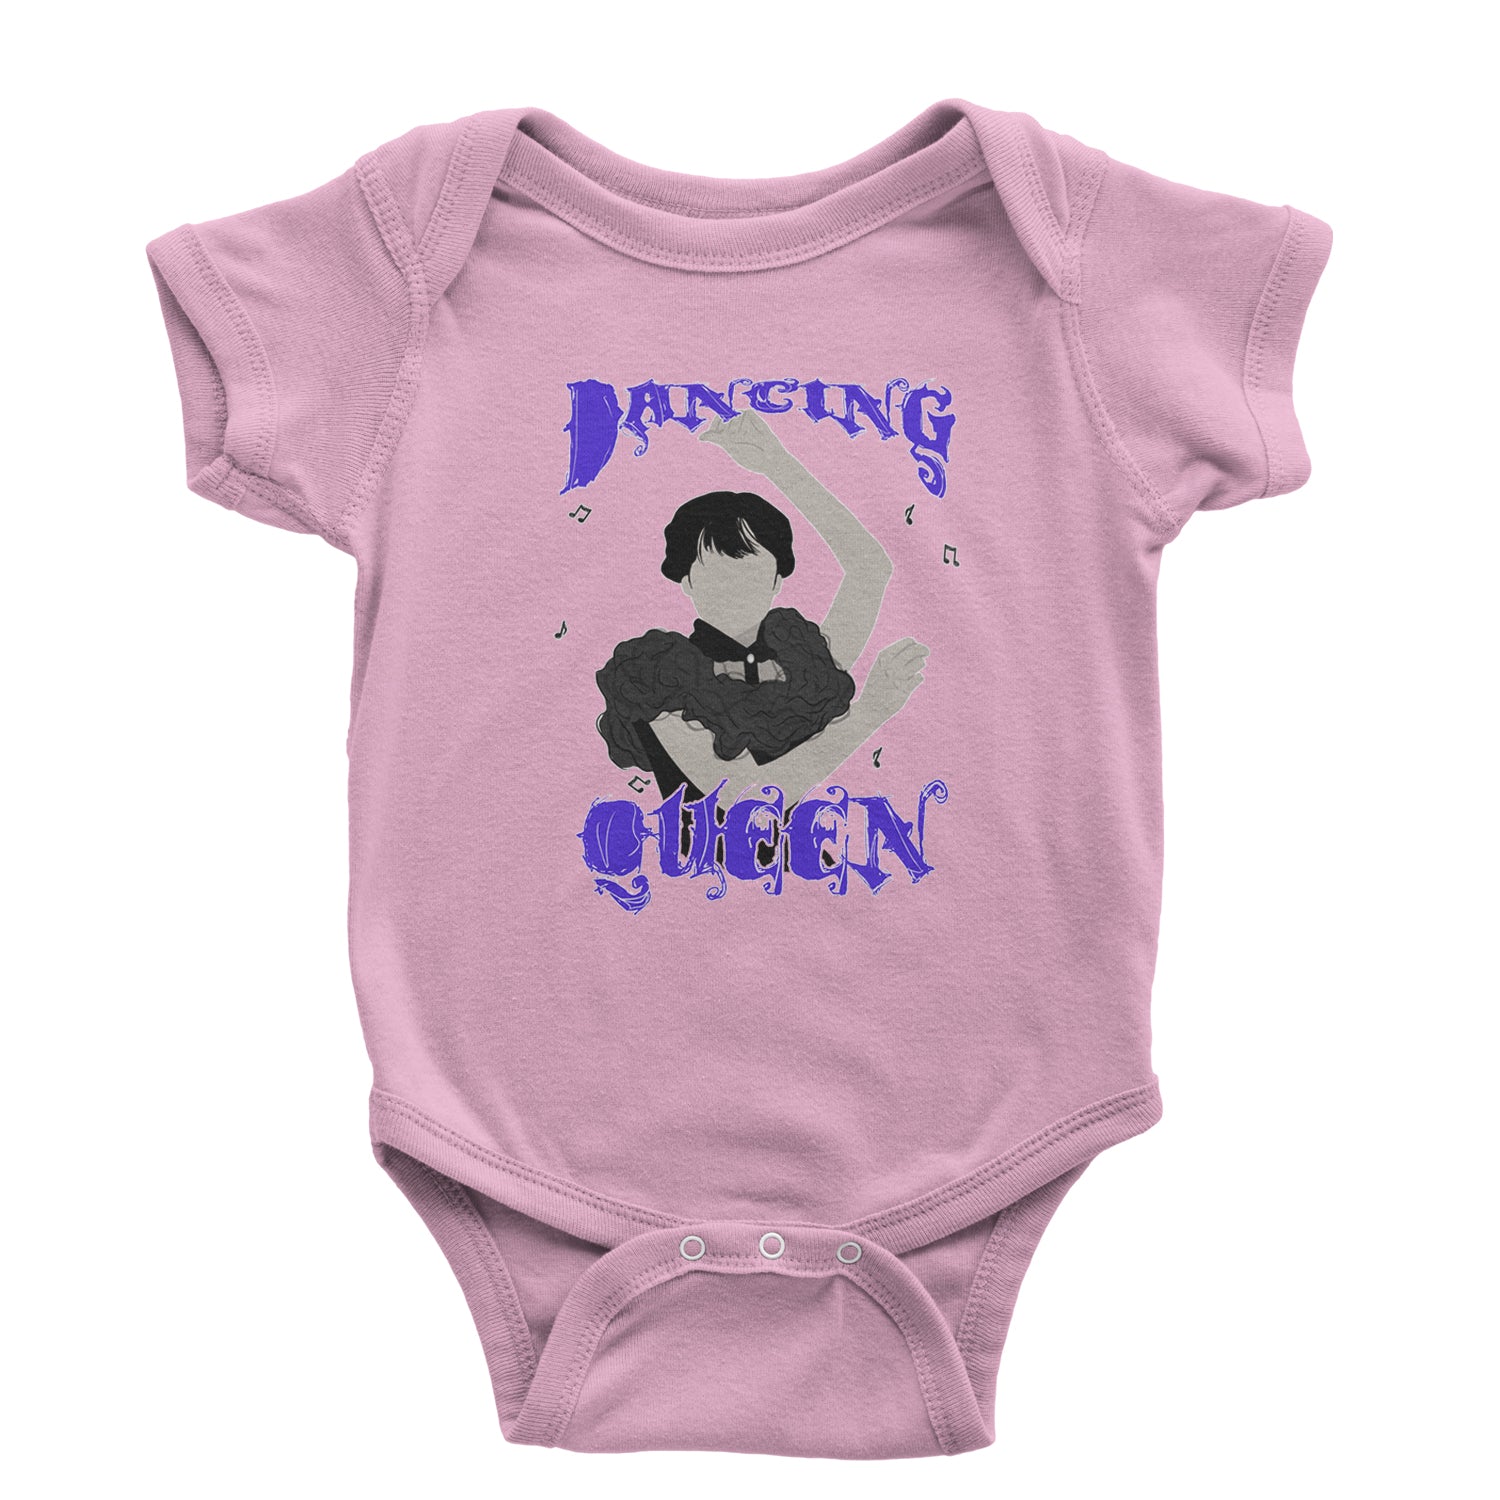 Wednesday Dancing Queen Infant One-Piece Romper Bodysuit and Toddler T-shirt black, On, we, wear, wednesdays by Expression Tees